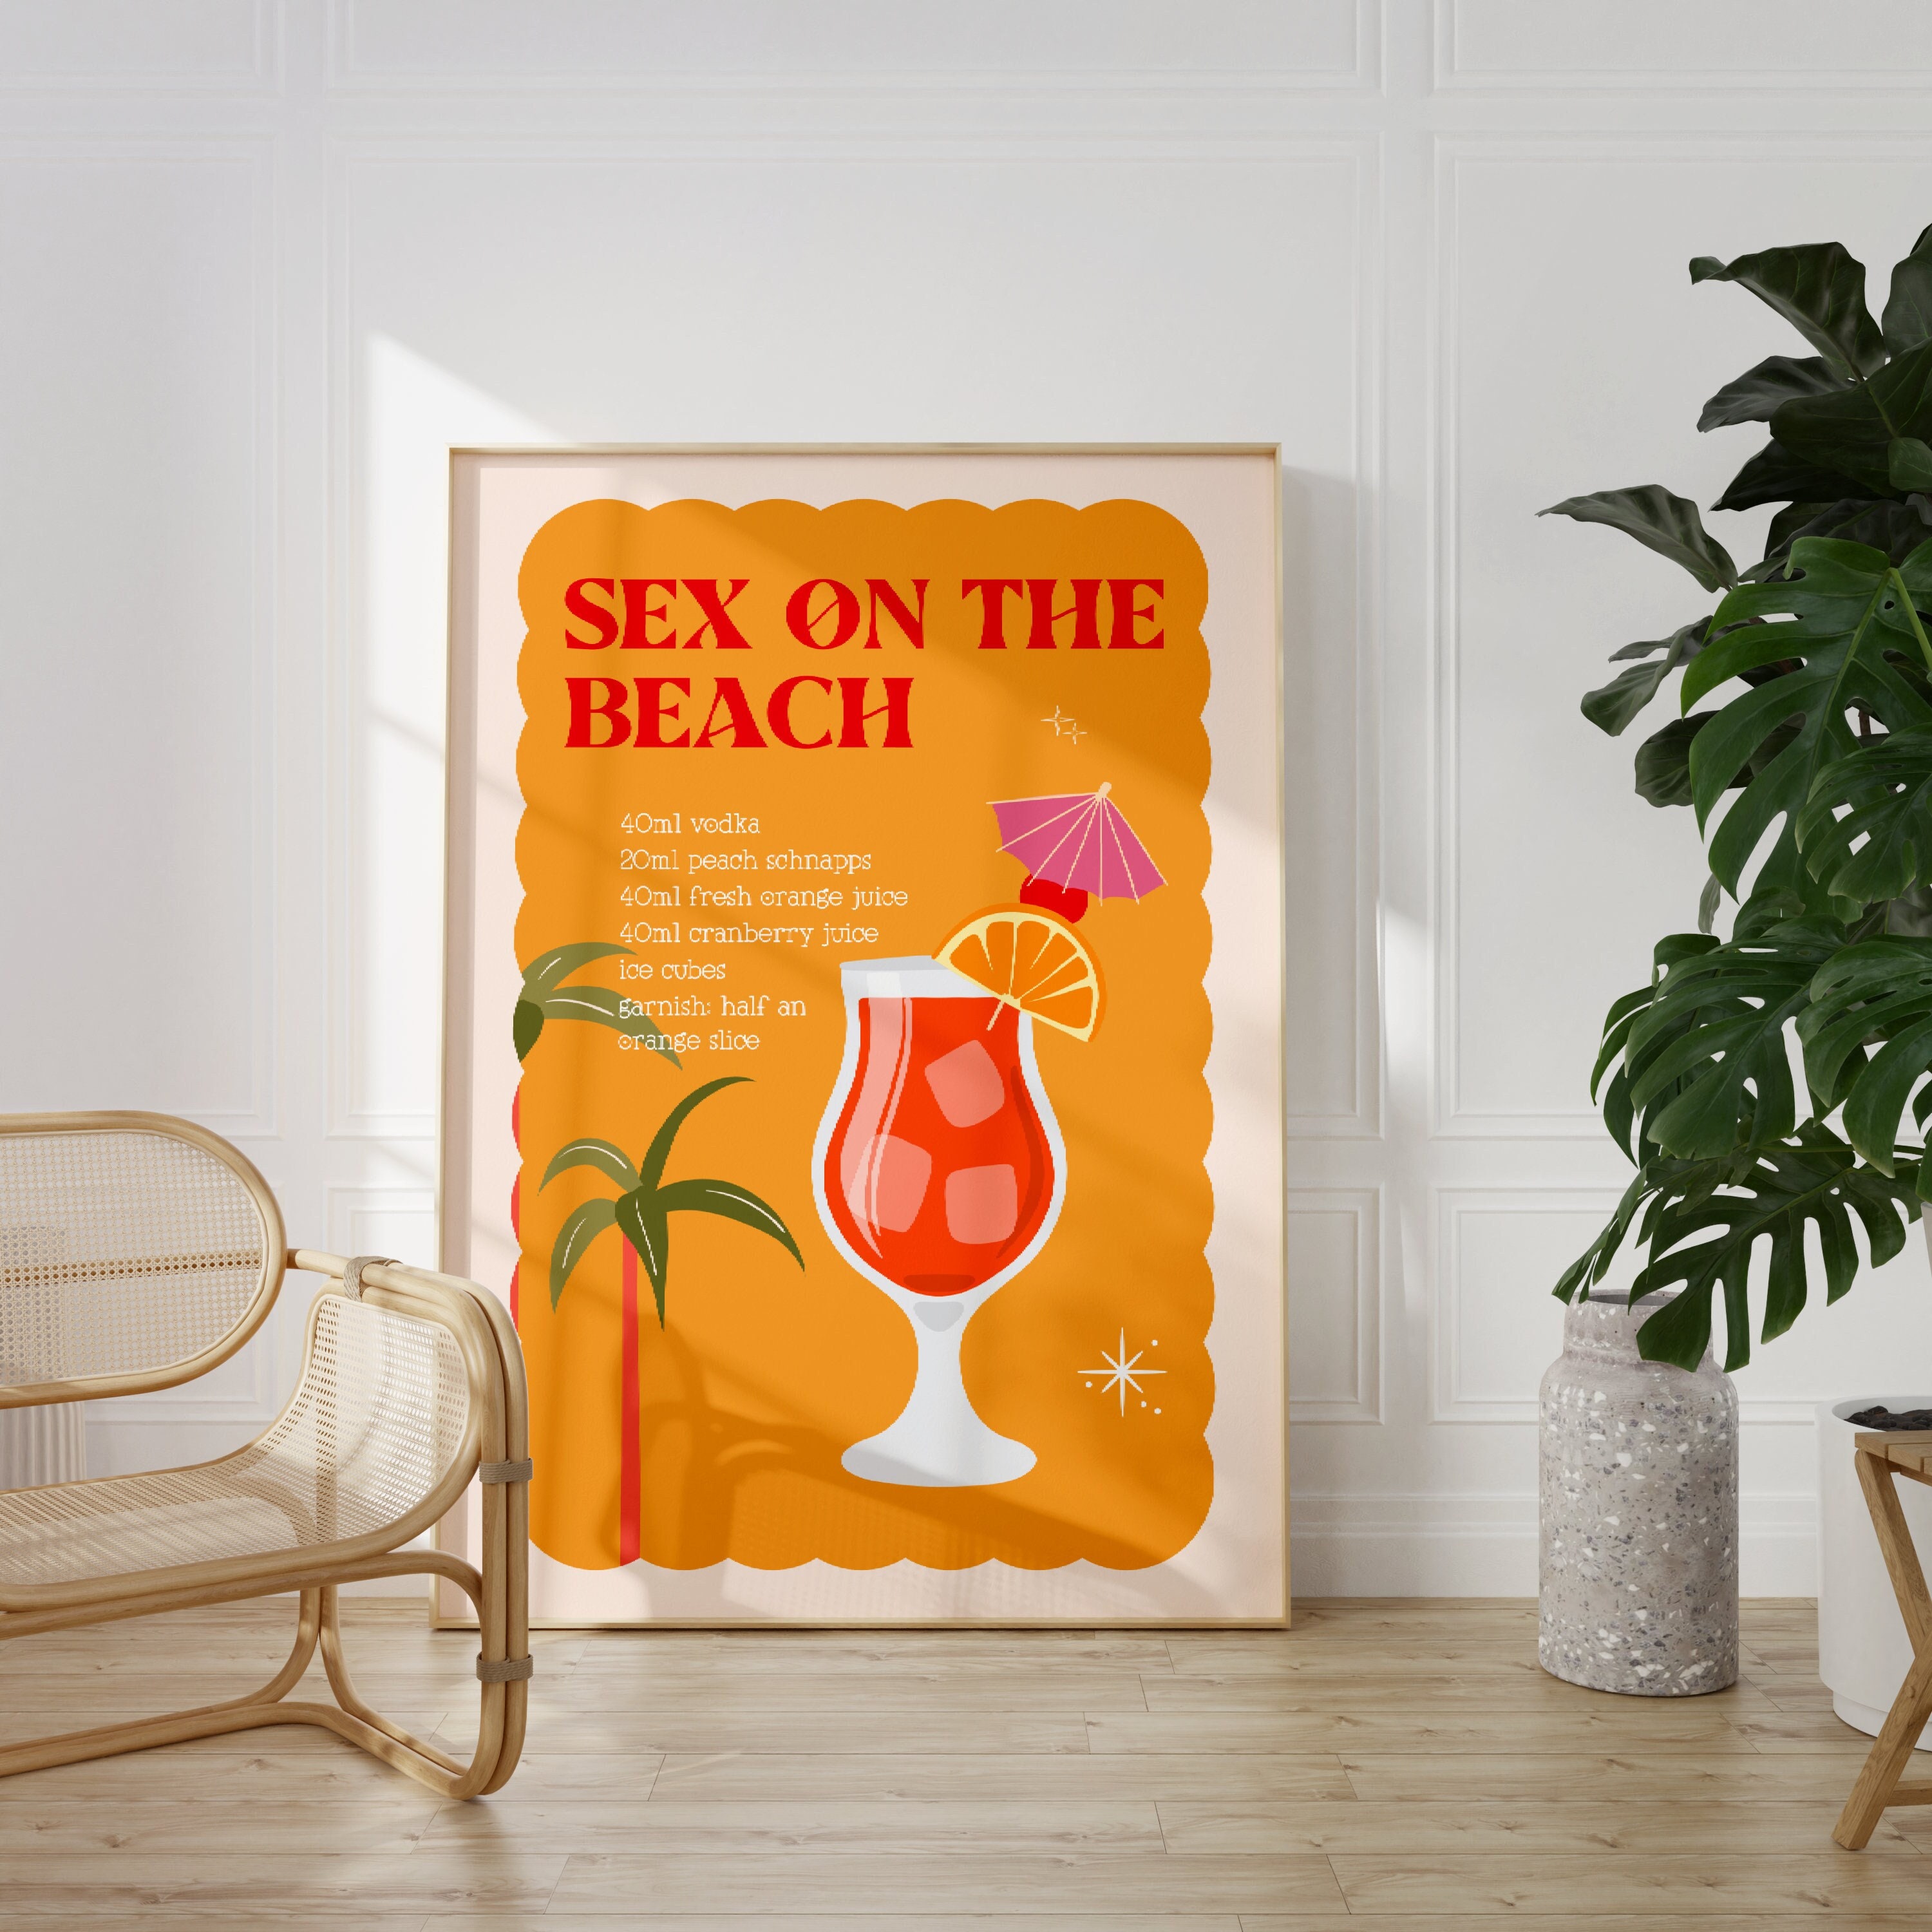 Sex on Beach Poster image pic